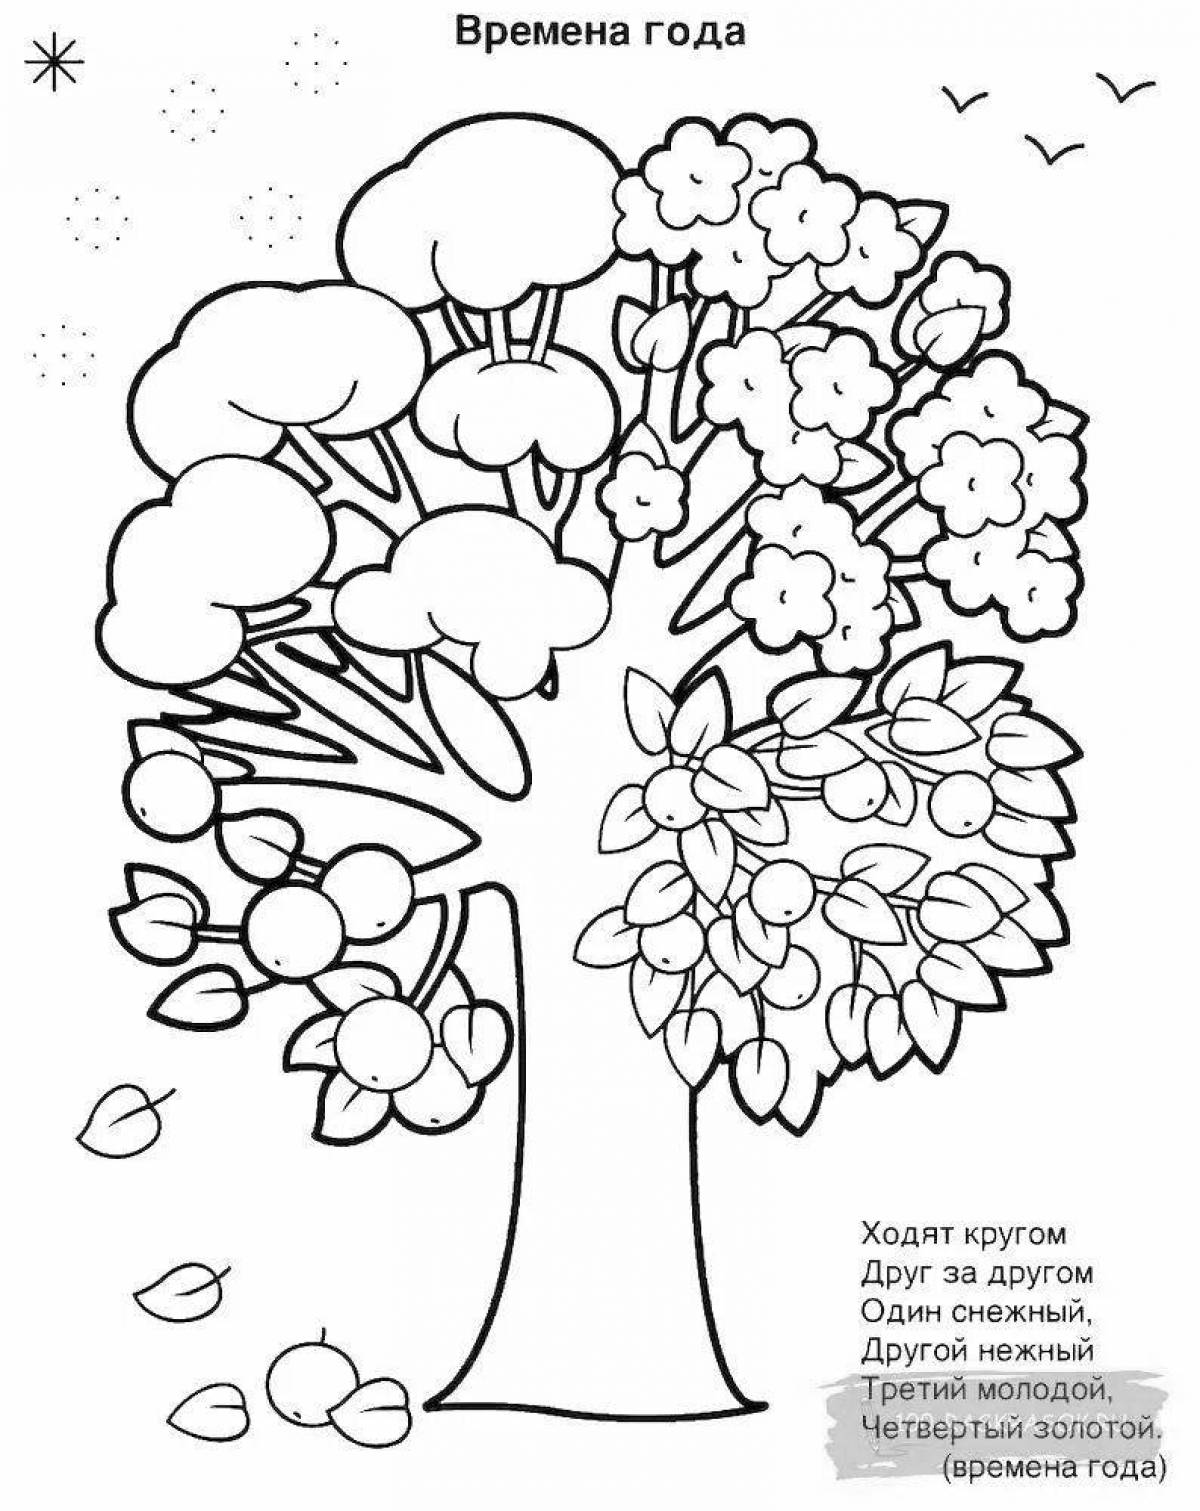 Colour-bright coloring book for children 3-4 years old seasons